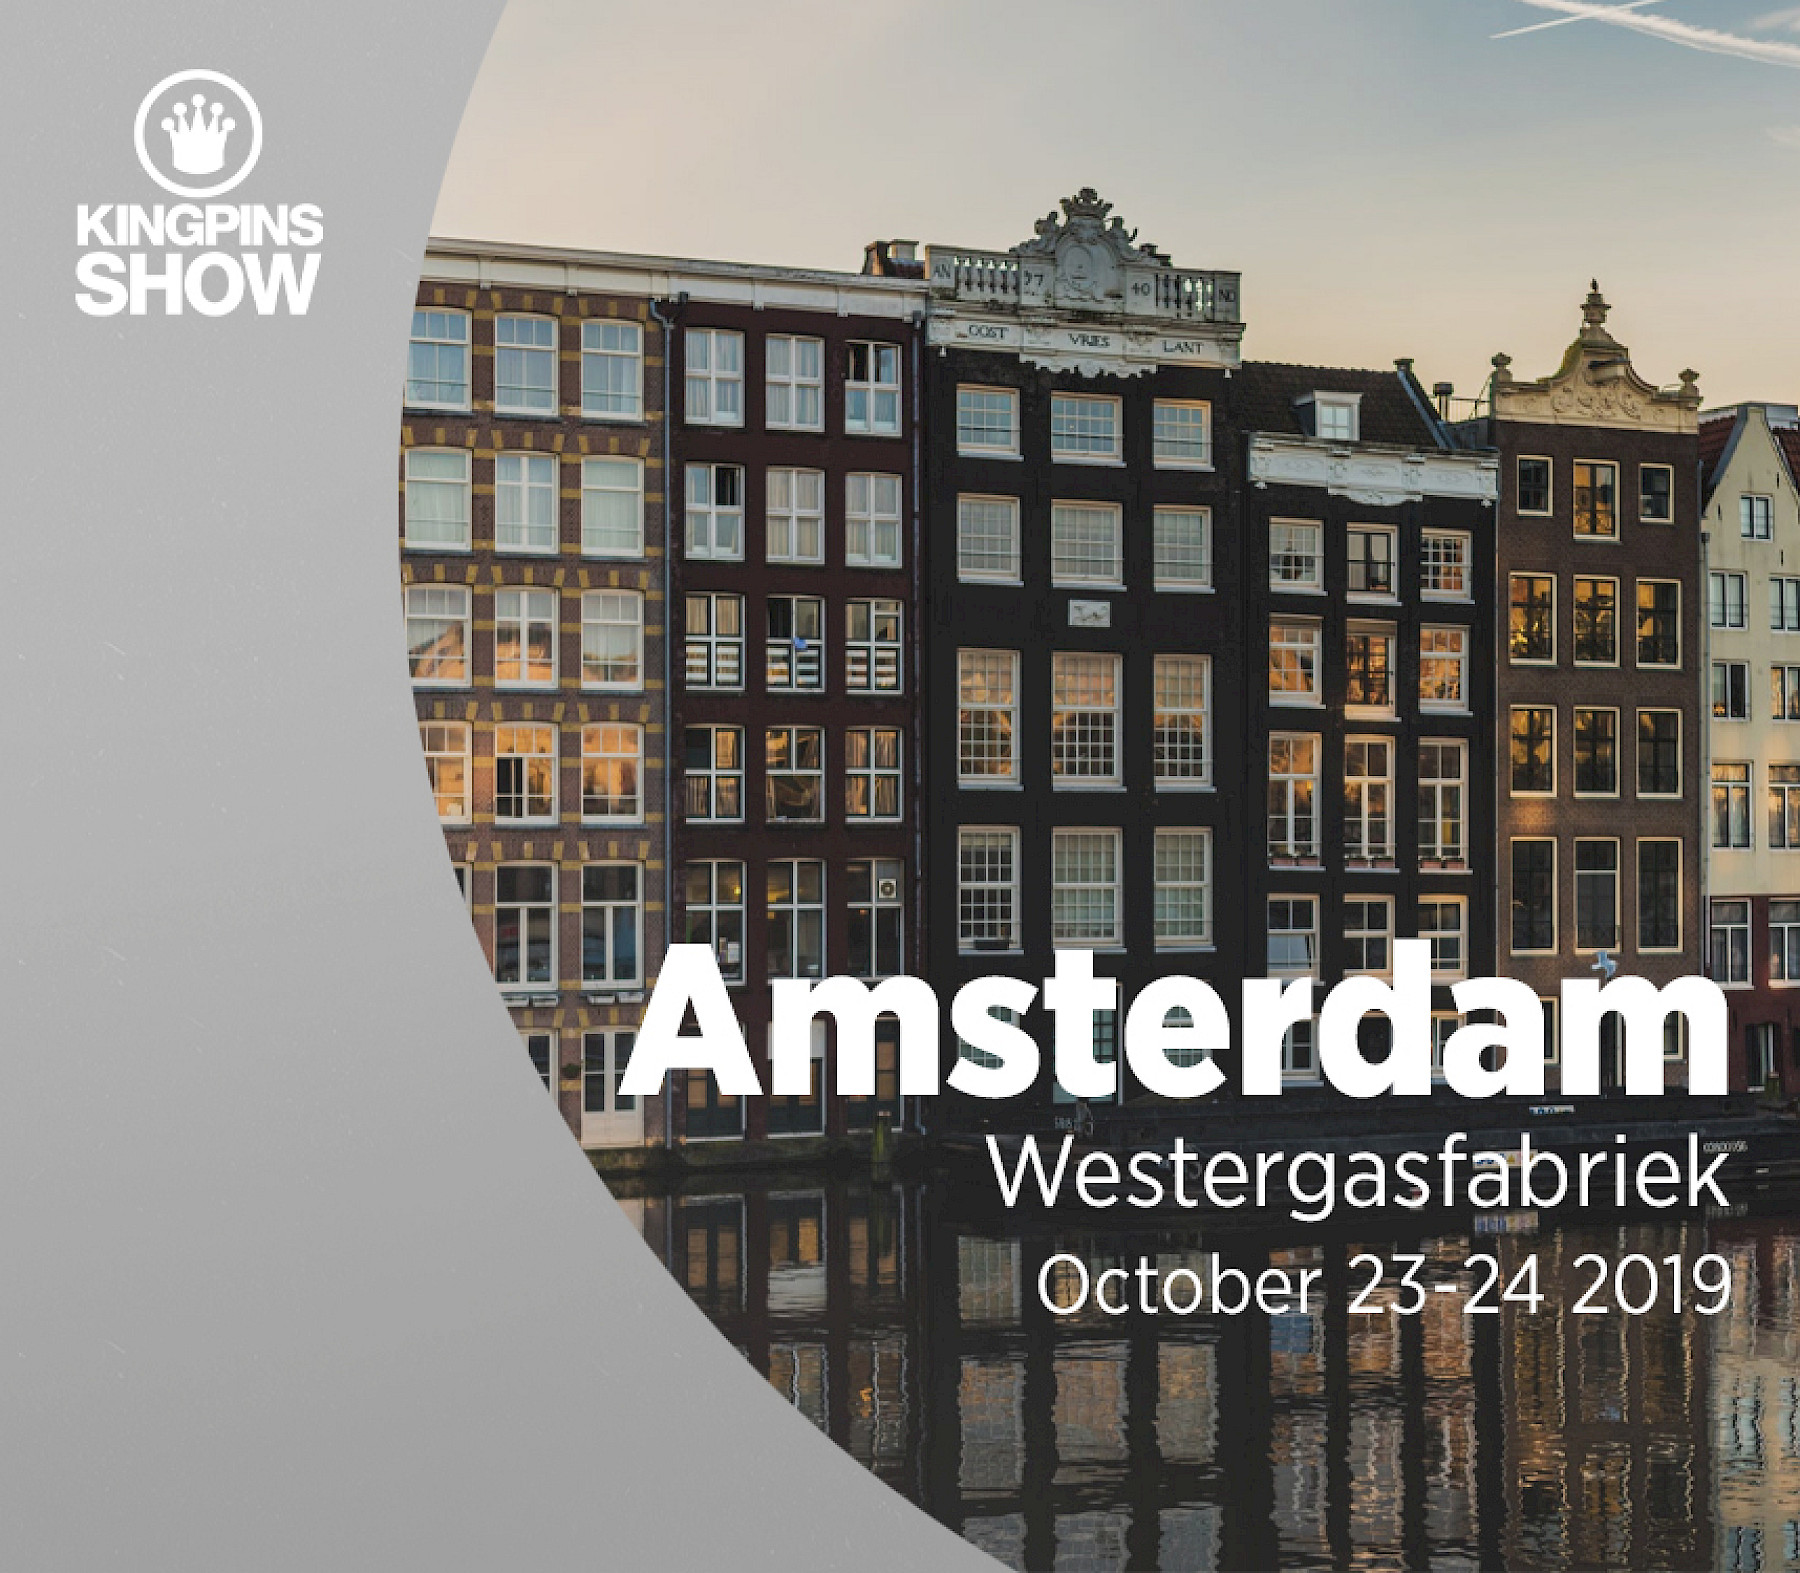 The Kingpins Show Amsterdam 23-24 October 2019